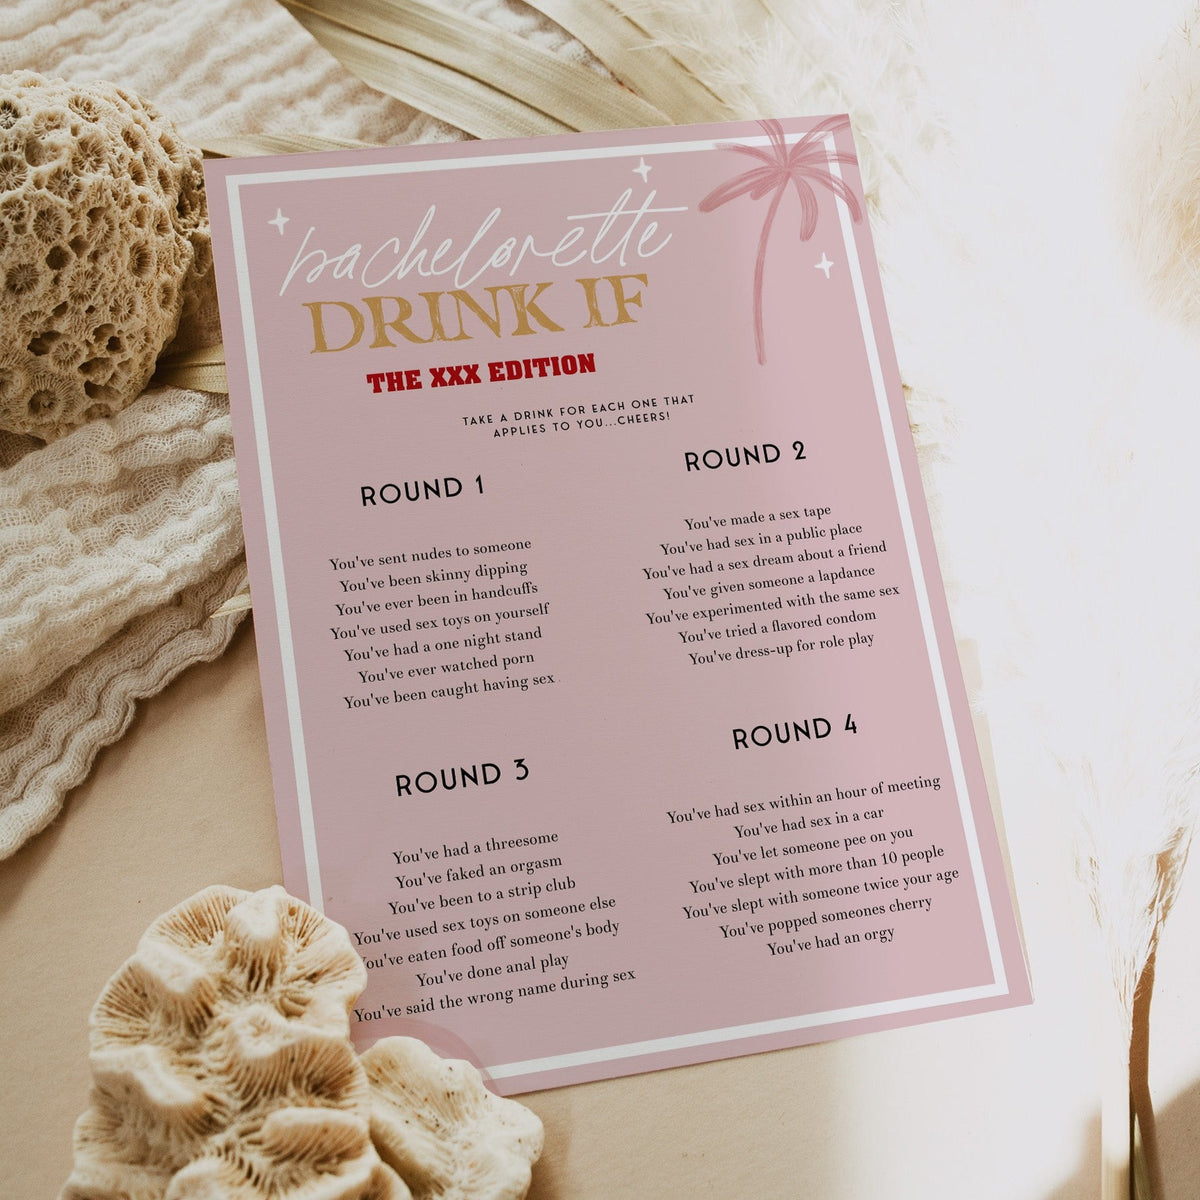 Fully editable and printable bridal shower dirty bachelorette drink if game with a Palm Springs design. Perfect for a Palm Springs bridal shower themed party